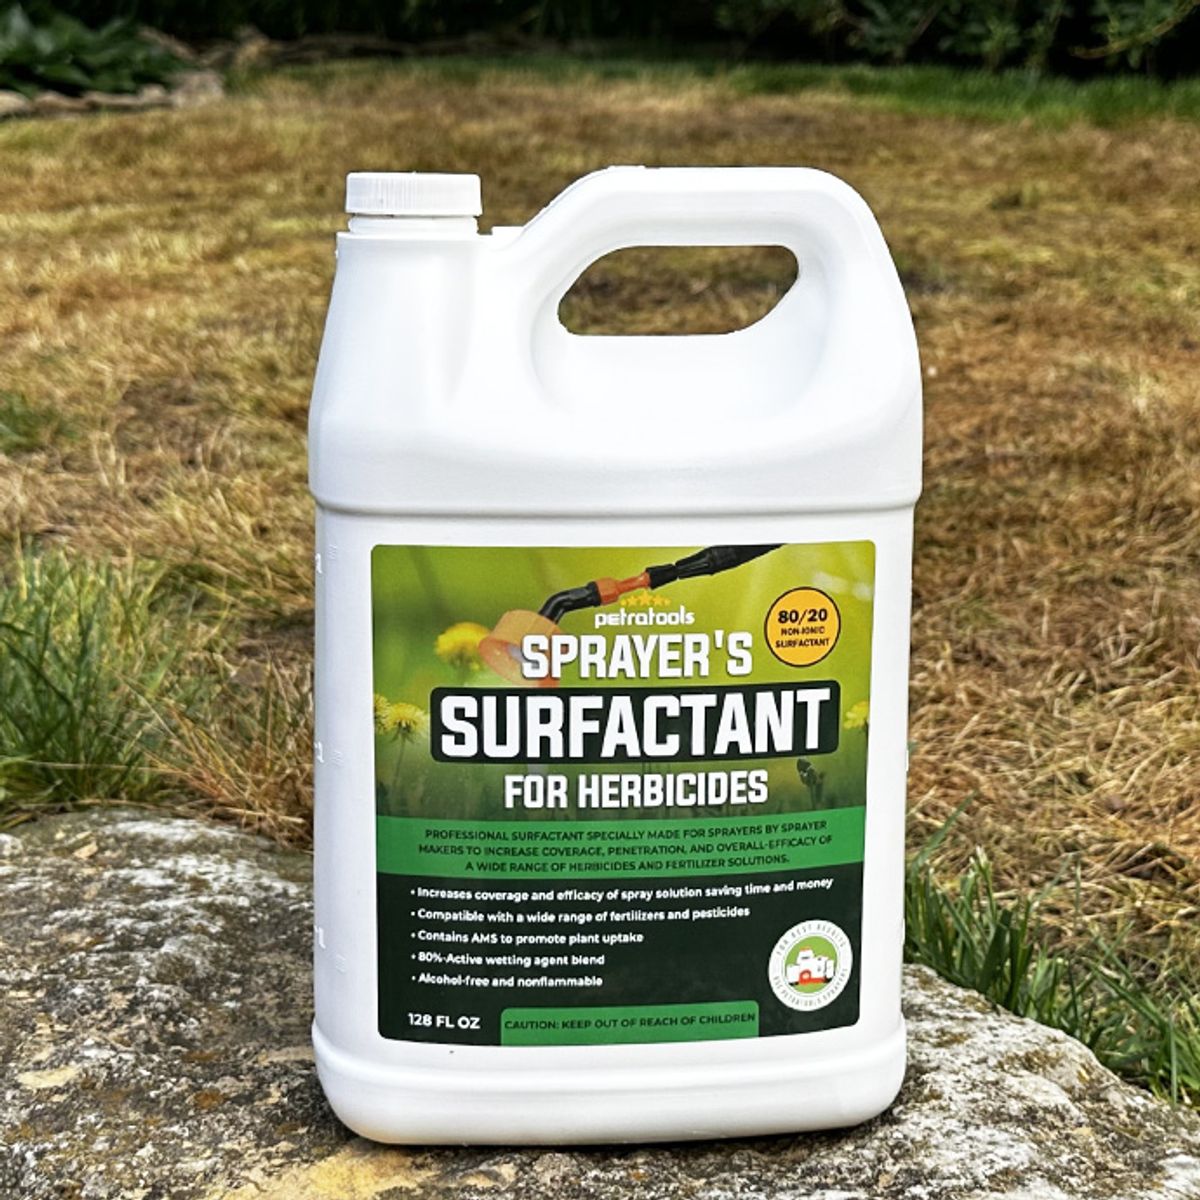 What's in Sprayer's Surfactant?